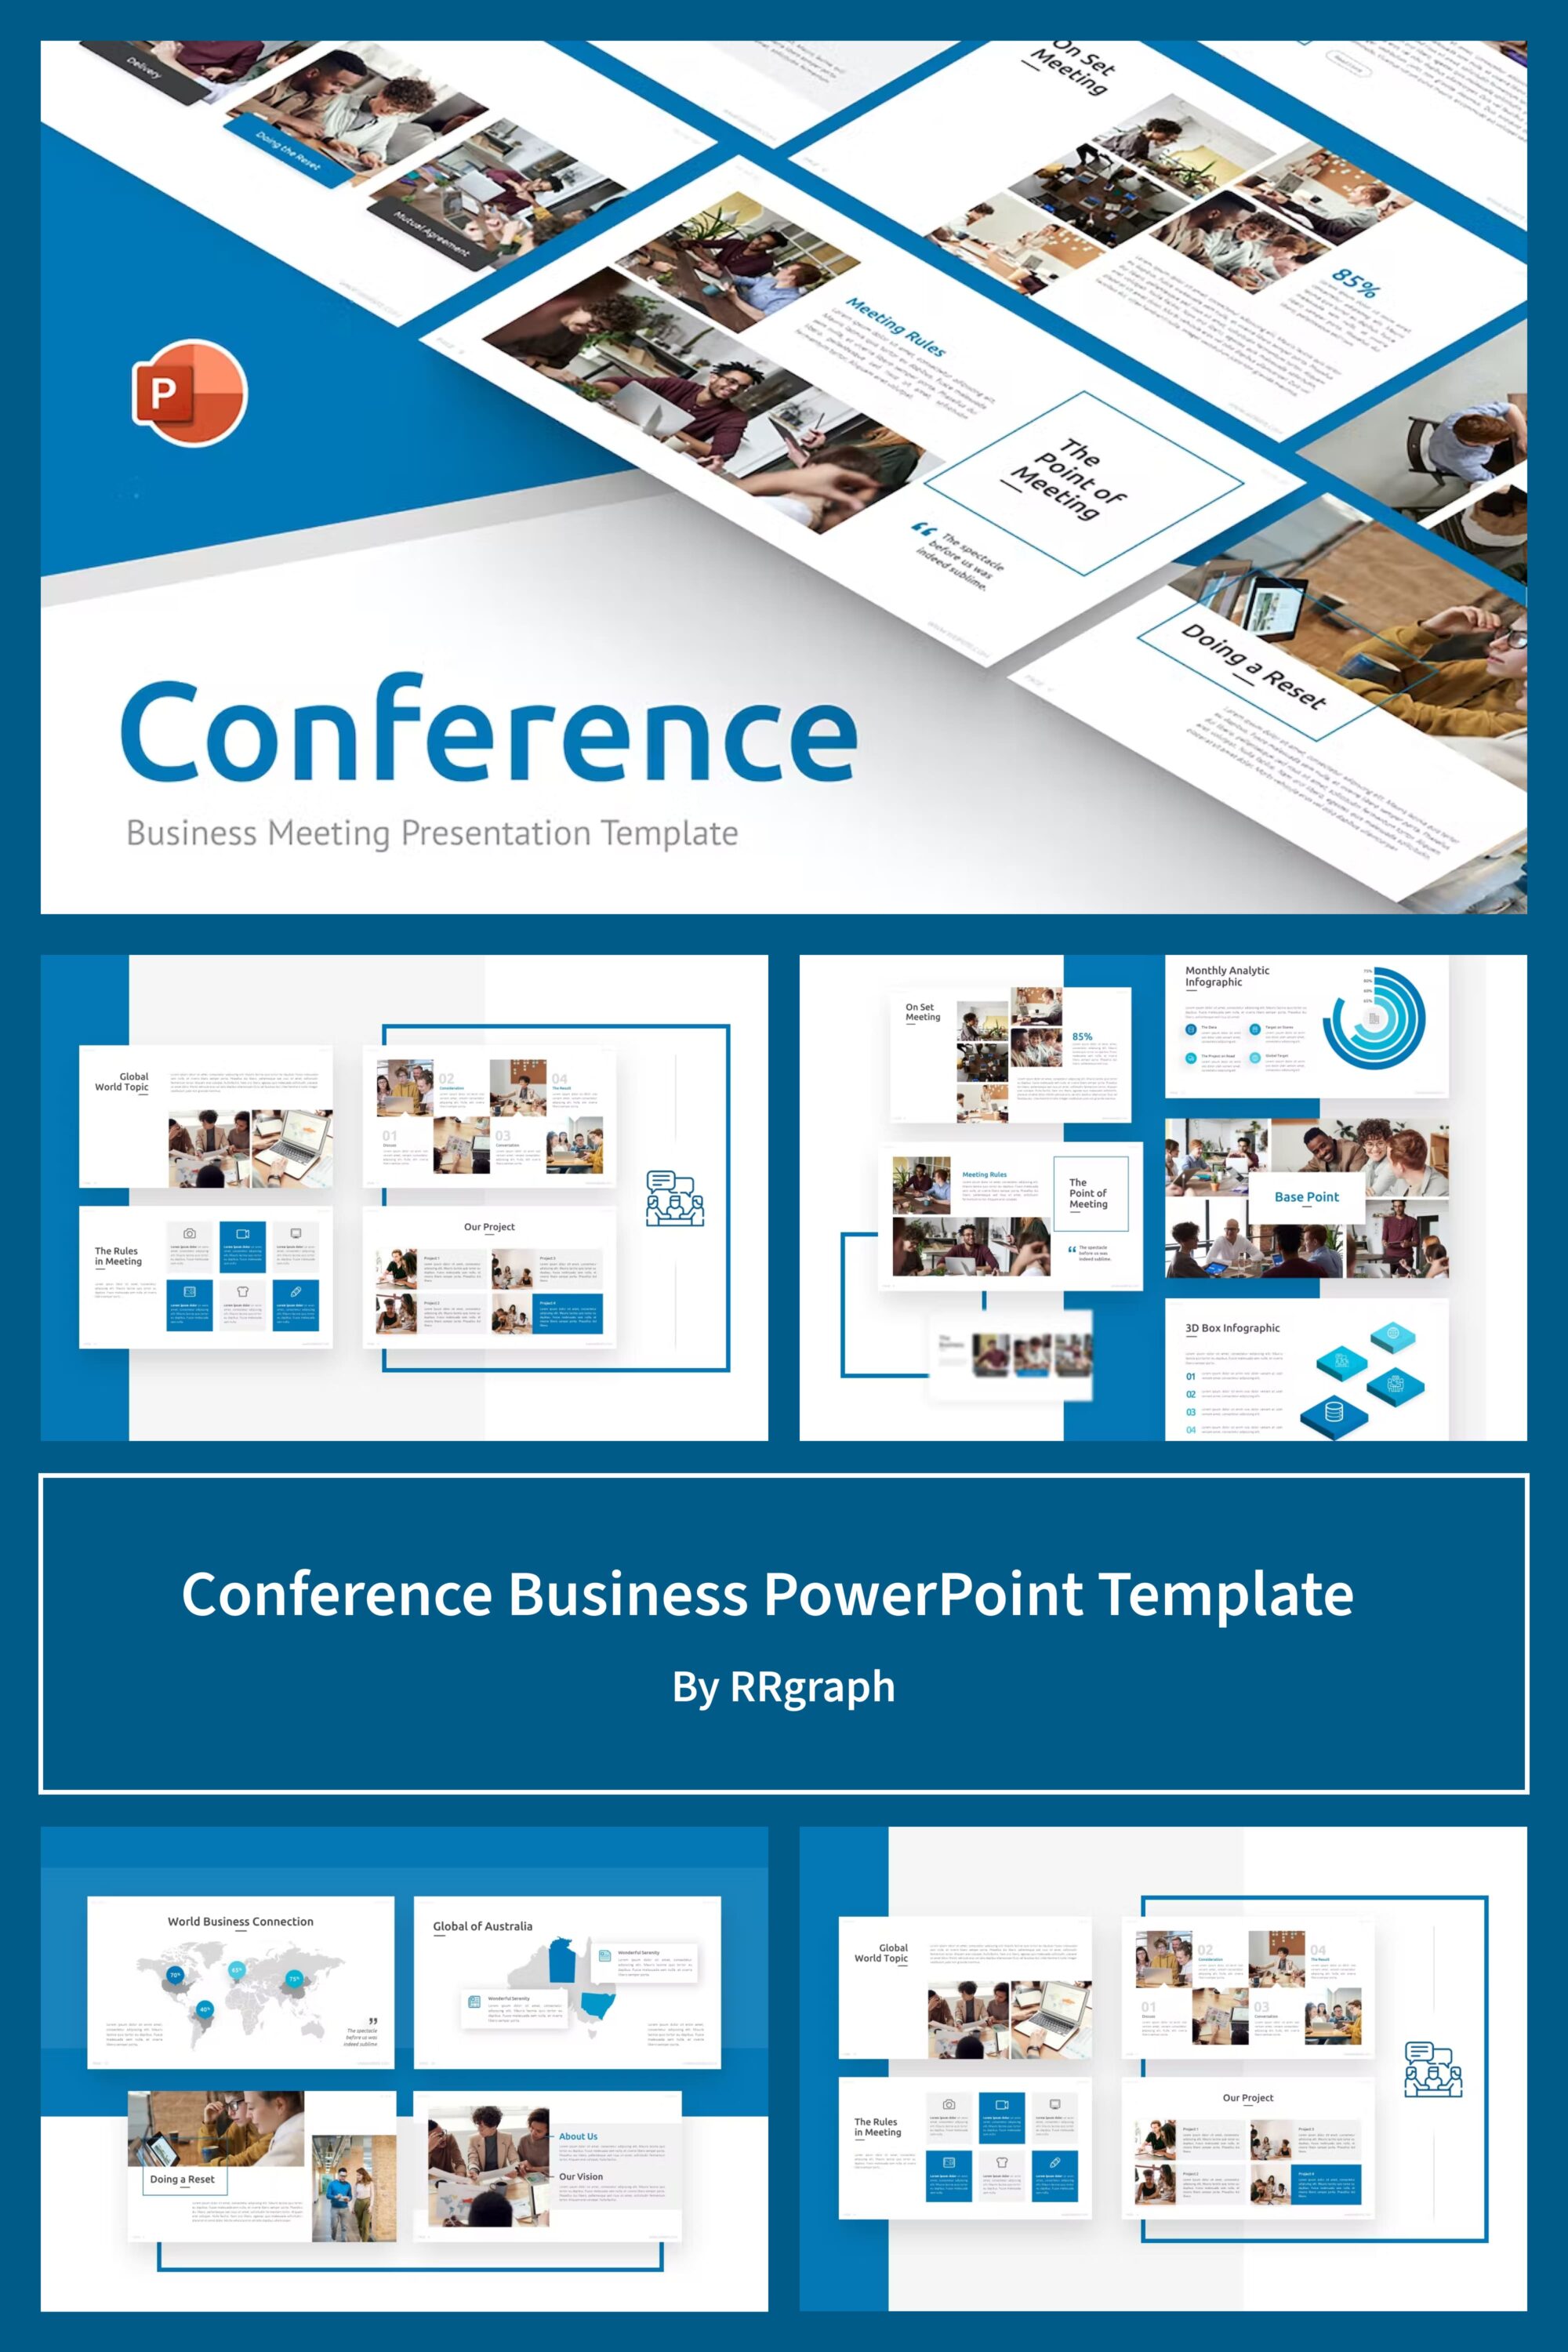 Conference business powerpoint template images of pinterest.